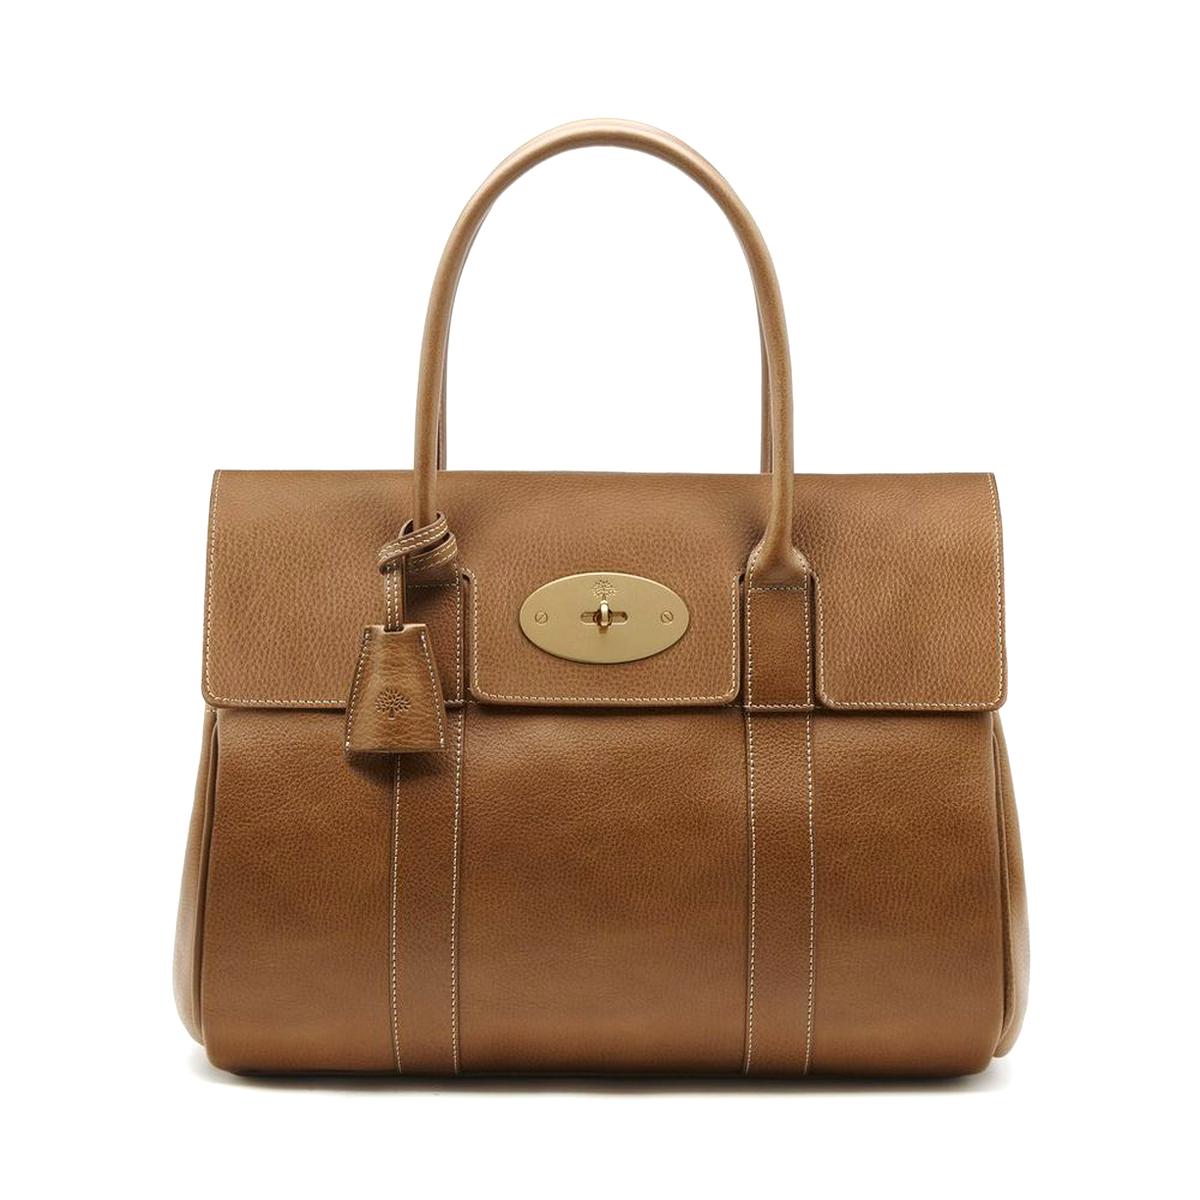 Mulberry Handbag Bayswater for sale in UK | View 76 ads